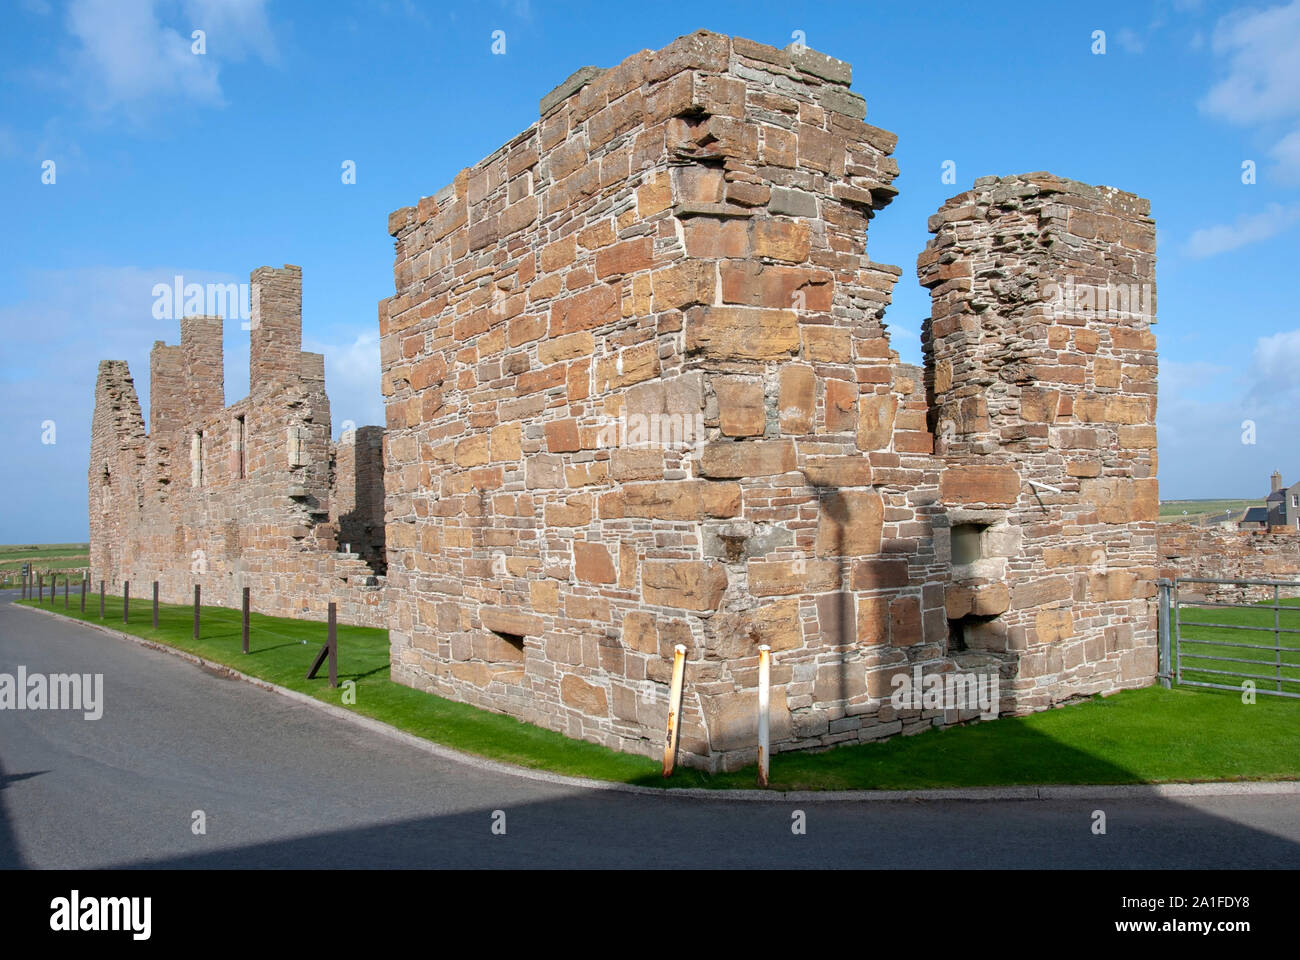 The Picturesque Ruins of Earl Robert's 16th Century Palace in Birsay West Mainland Orkney Isles Scotland United Kingdom exterior view preserved 1574 s Stock Photo